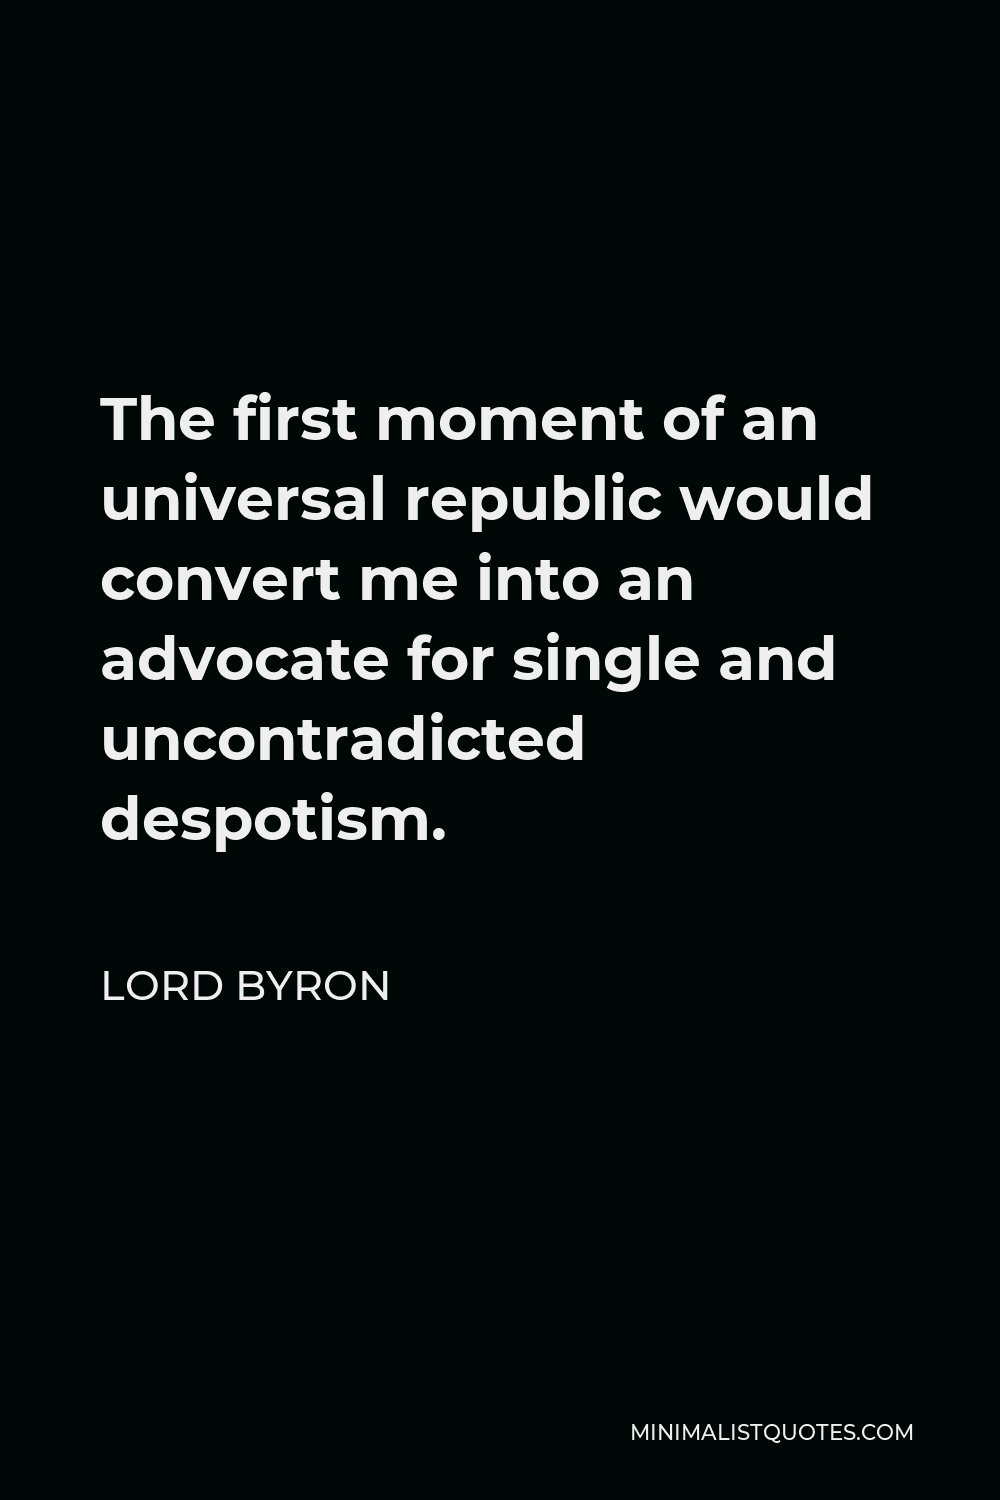 Lord Byron Quote - The first moment of an universal republic would convert me into an advocate for single and uncontradicted despotism.